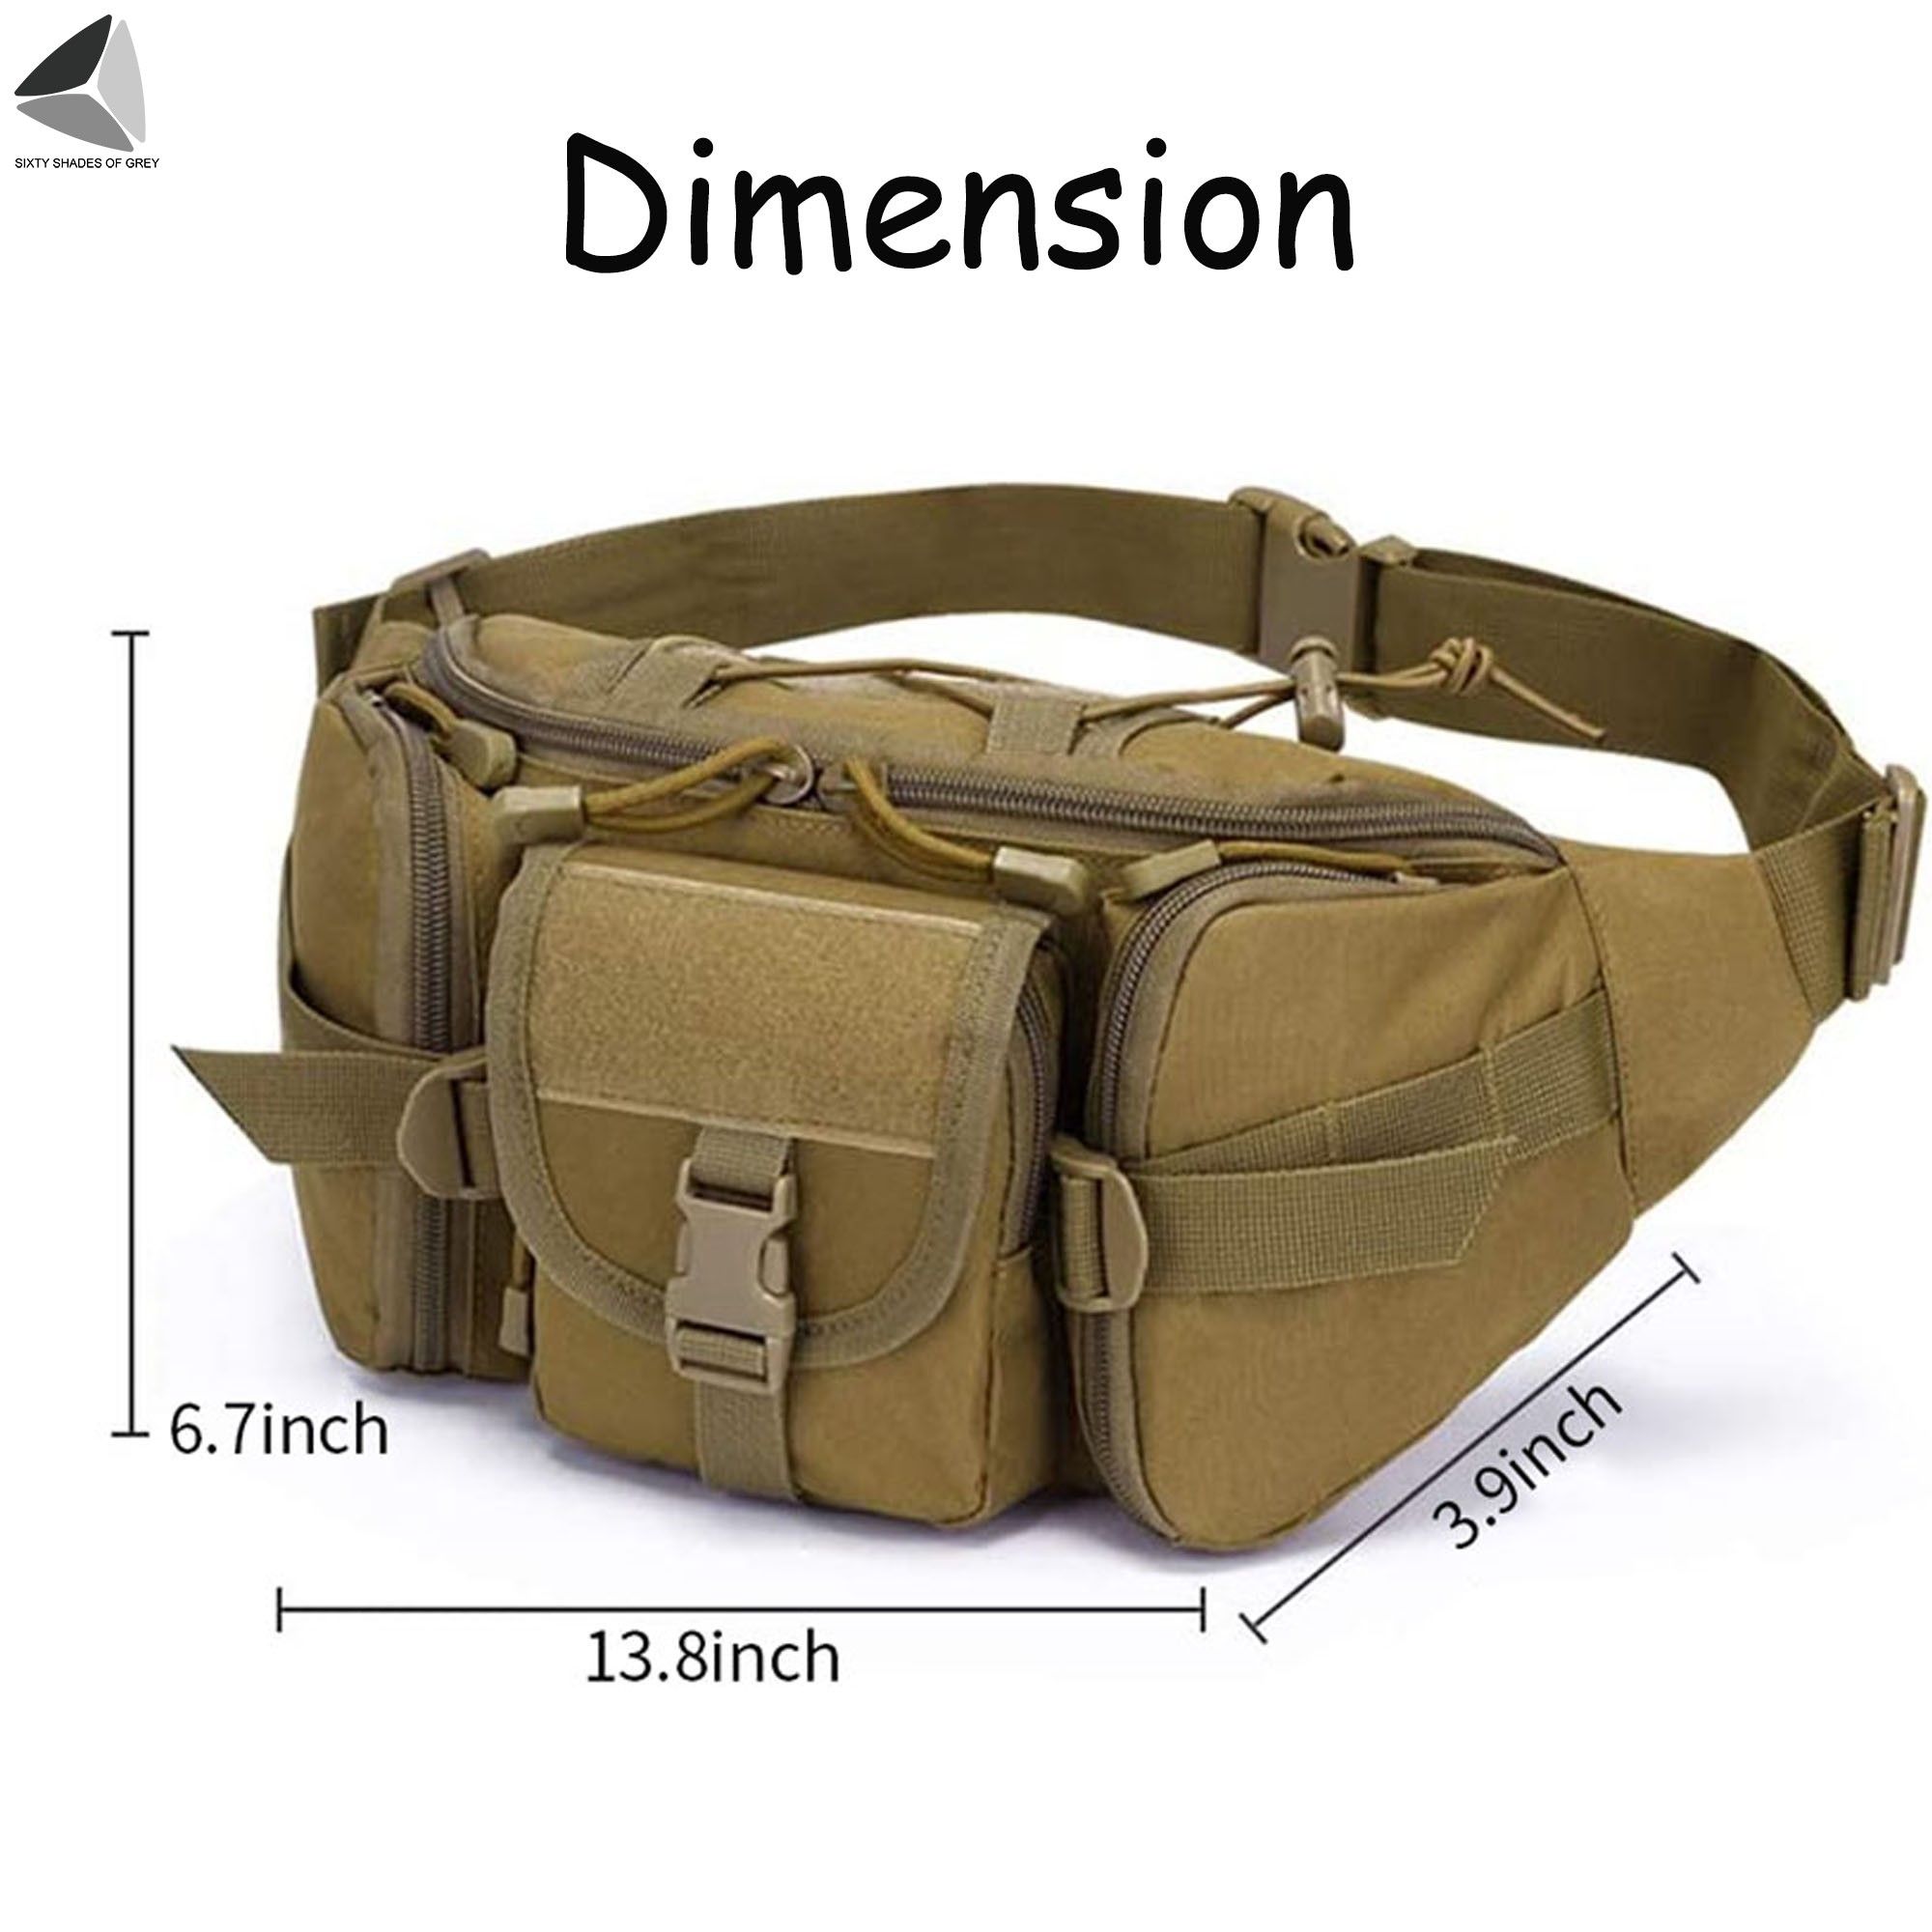 PULLIMORE Fanny Pack Waist Bag Pack Utility Hip Pack Bag with Adjustable Strap Waterproof for Outdoors Fishing Cycling Camping Hiking Traveling Hunting (Camouflage) - image 4 of 9